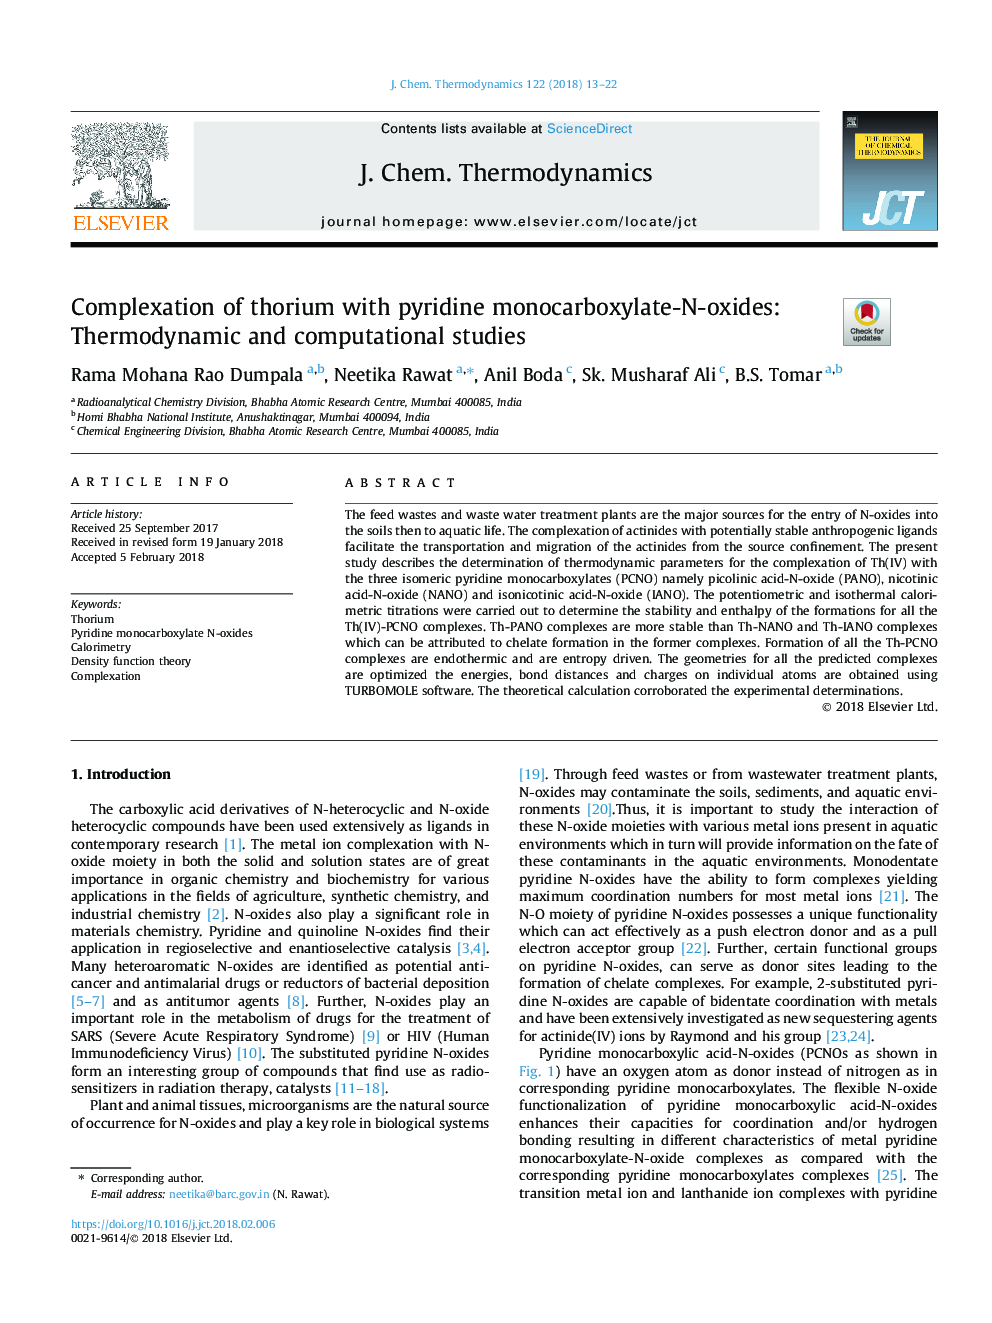 Complexation of thorium with pyridine monocarboxylate-N-oxides: Thermodynamic and computational studies